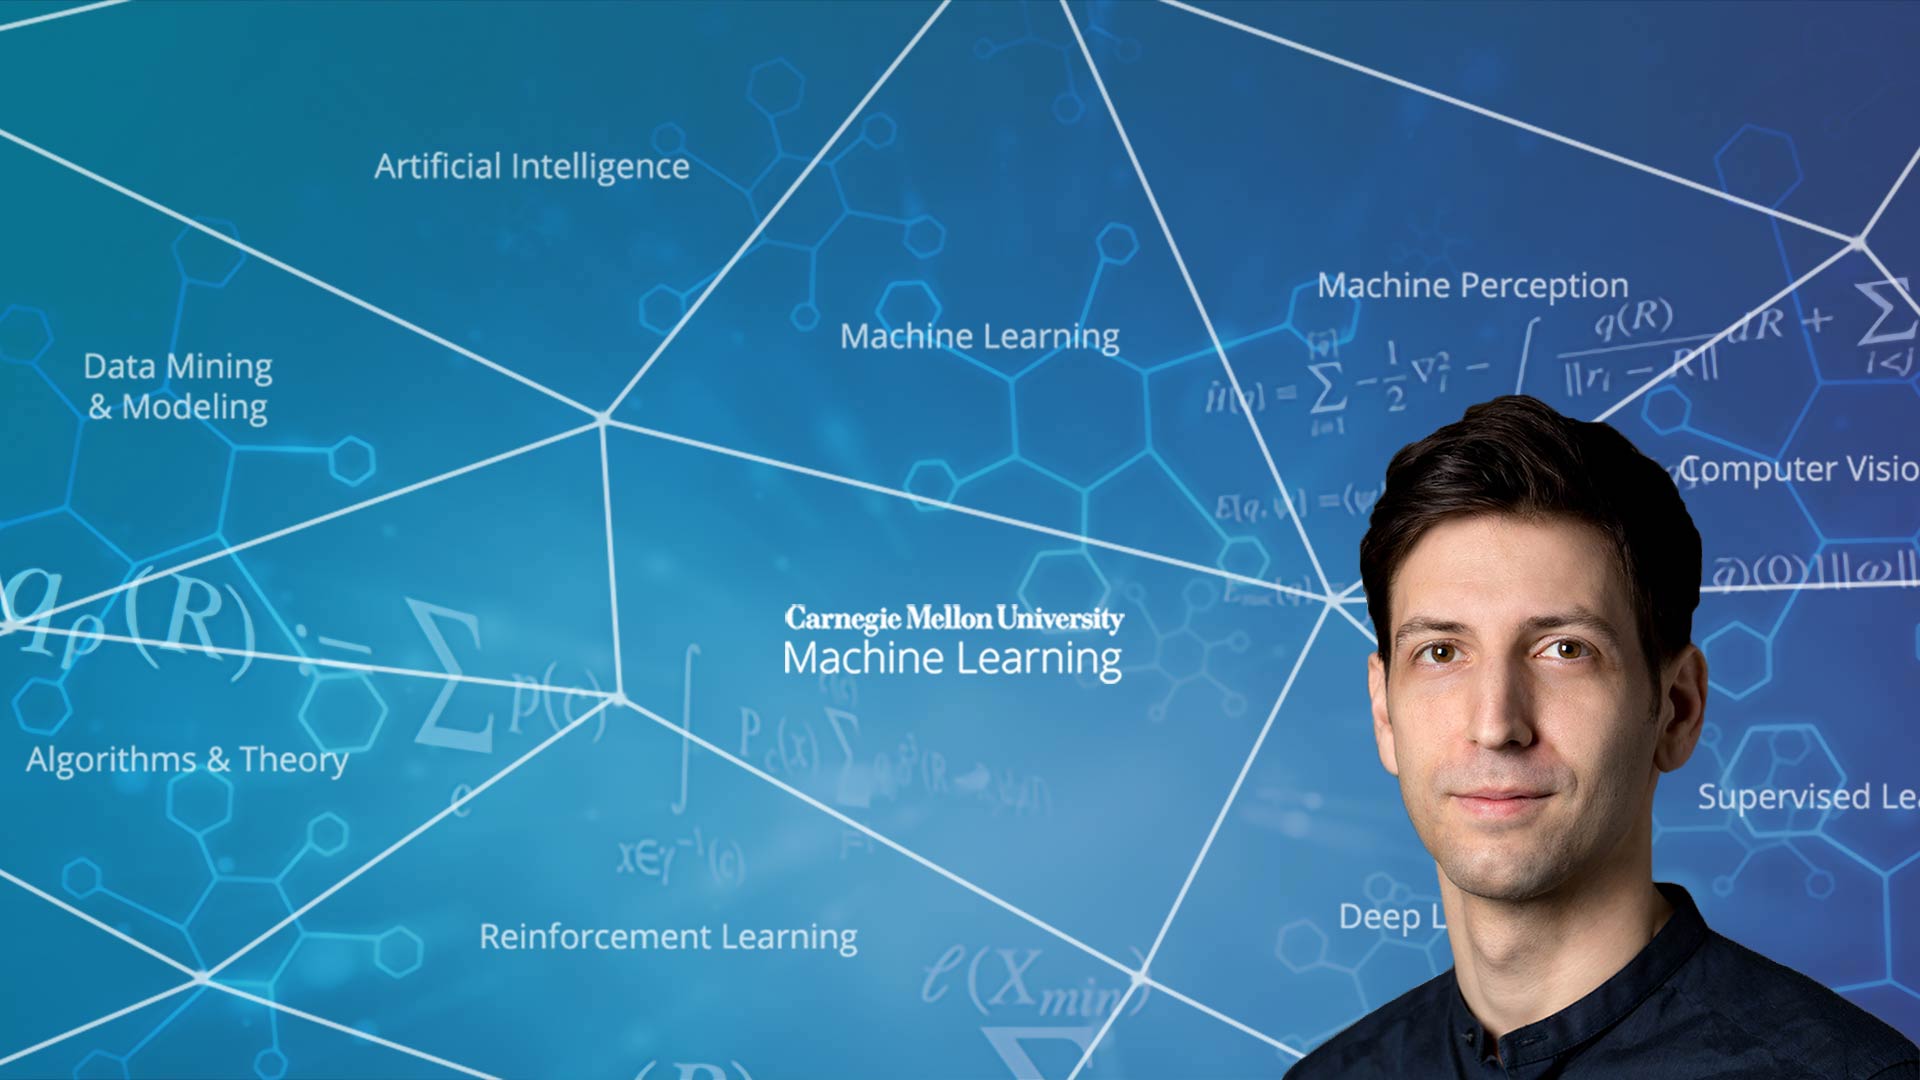 Current applications of AI revolve entirely around machine learning. However, researcher Zachary Lipton says that is not the message you get from most media coverage on AI | Machine Learning